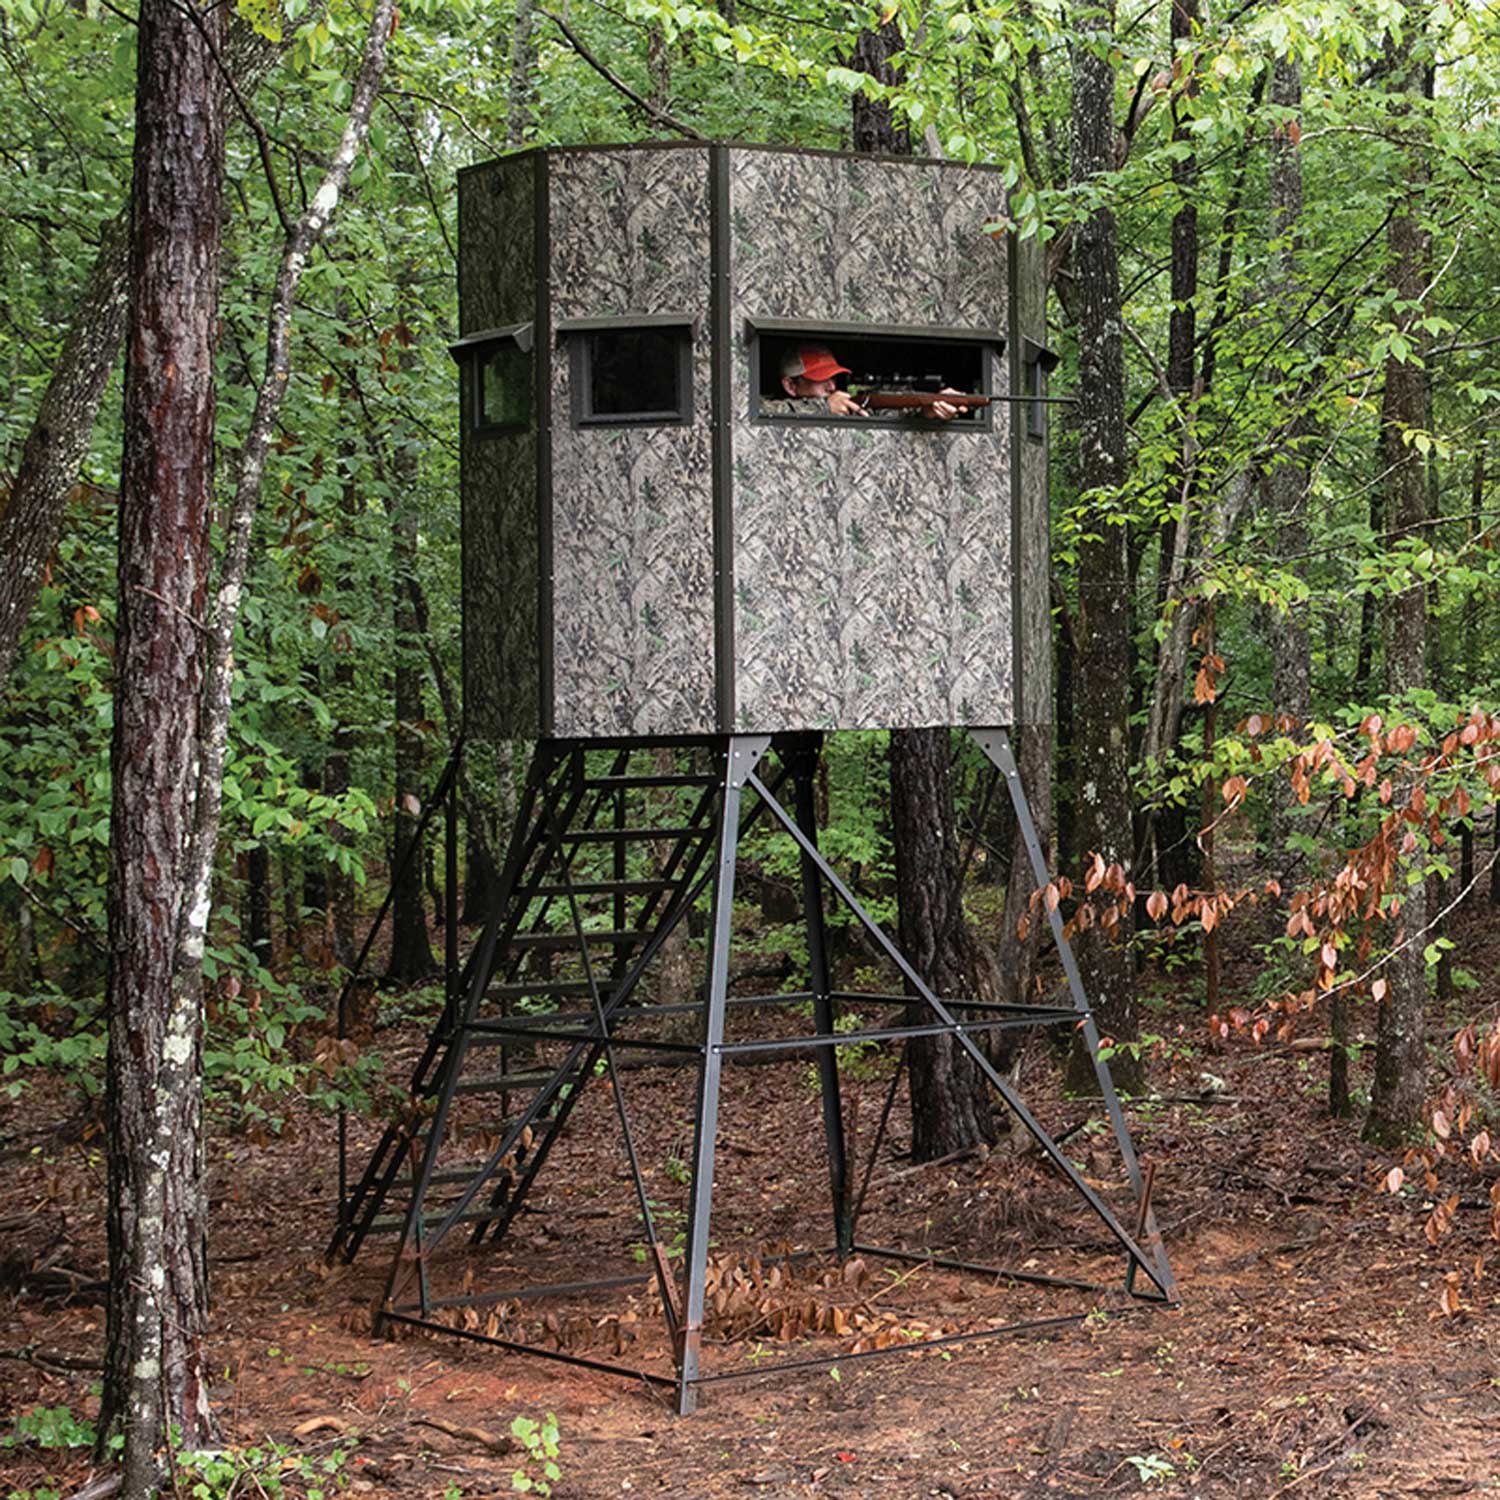 G78R: Texas Hunter Wrangler Rifle Octagon Shaped Camo Aluminum 5' x 7' Deer Blind with 8' Tower, Full Door, Stairs and Handrails